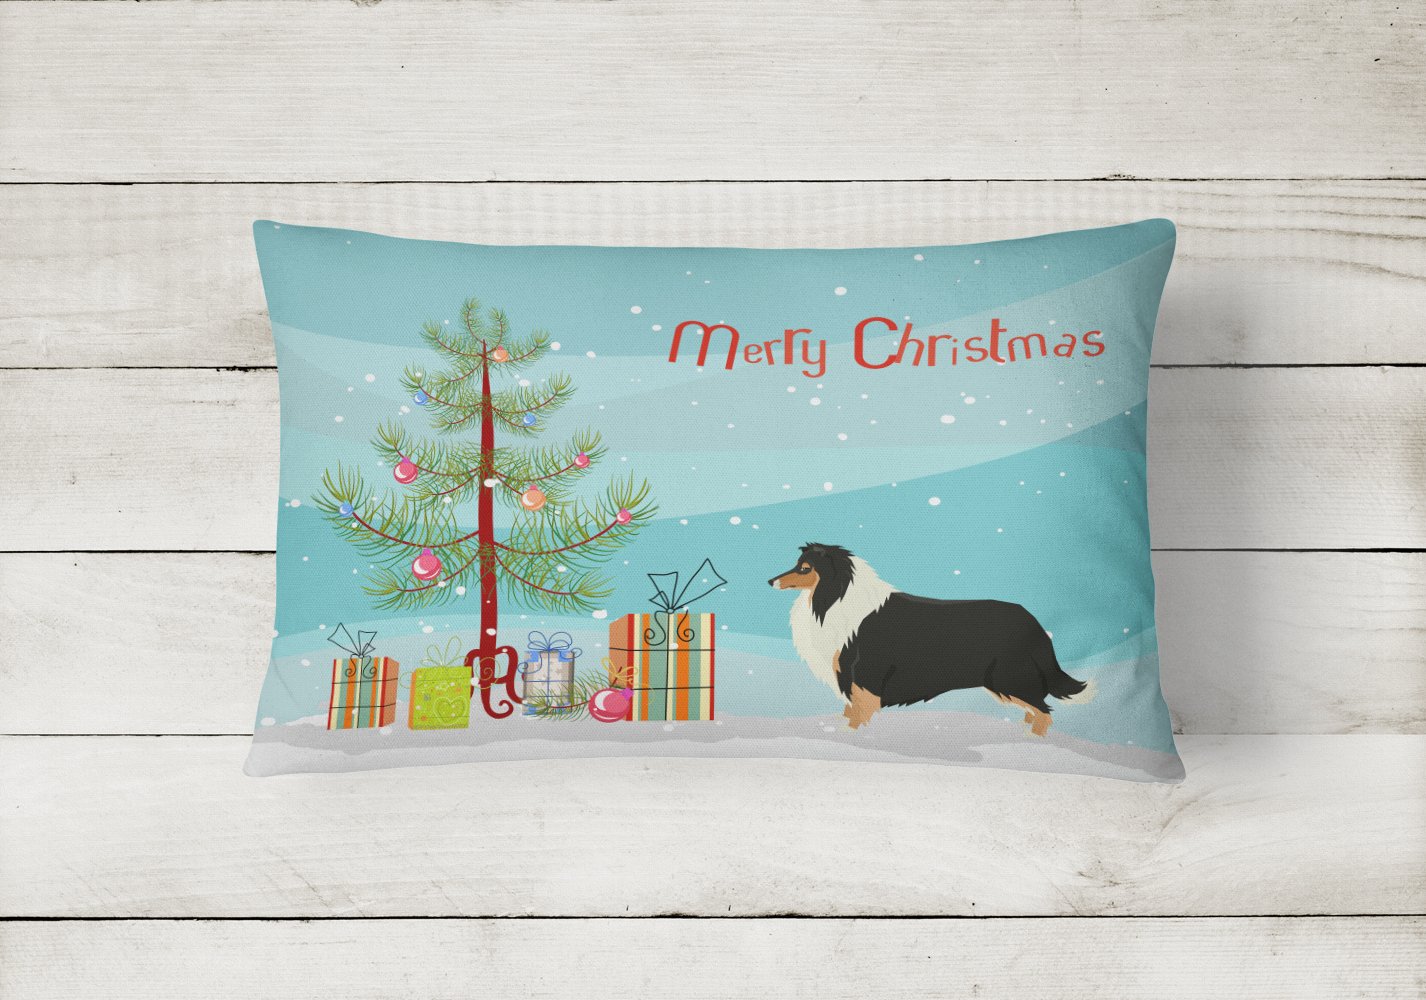 Collie Christmas Tree Canvas Fabric Decorative Pillow CK3532PW1216 by Caroline's Treasures